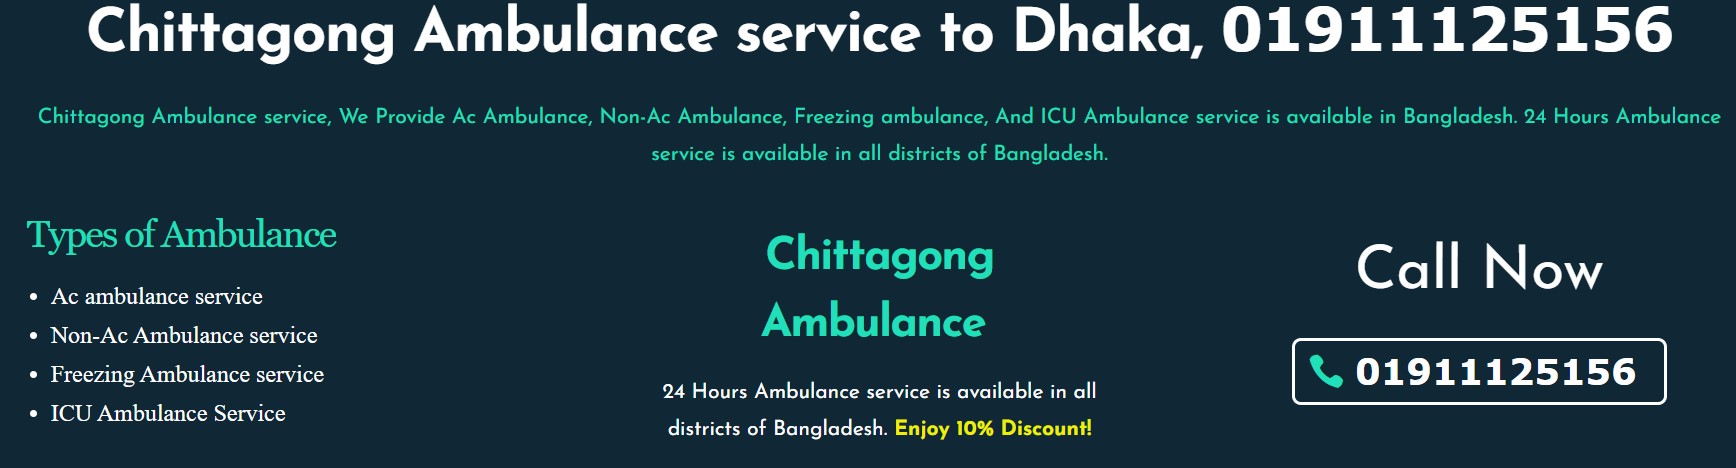 24 Hours Ambulance Service in Chitagong